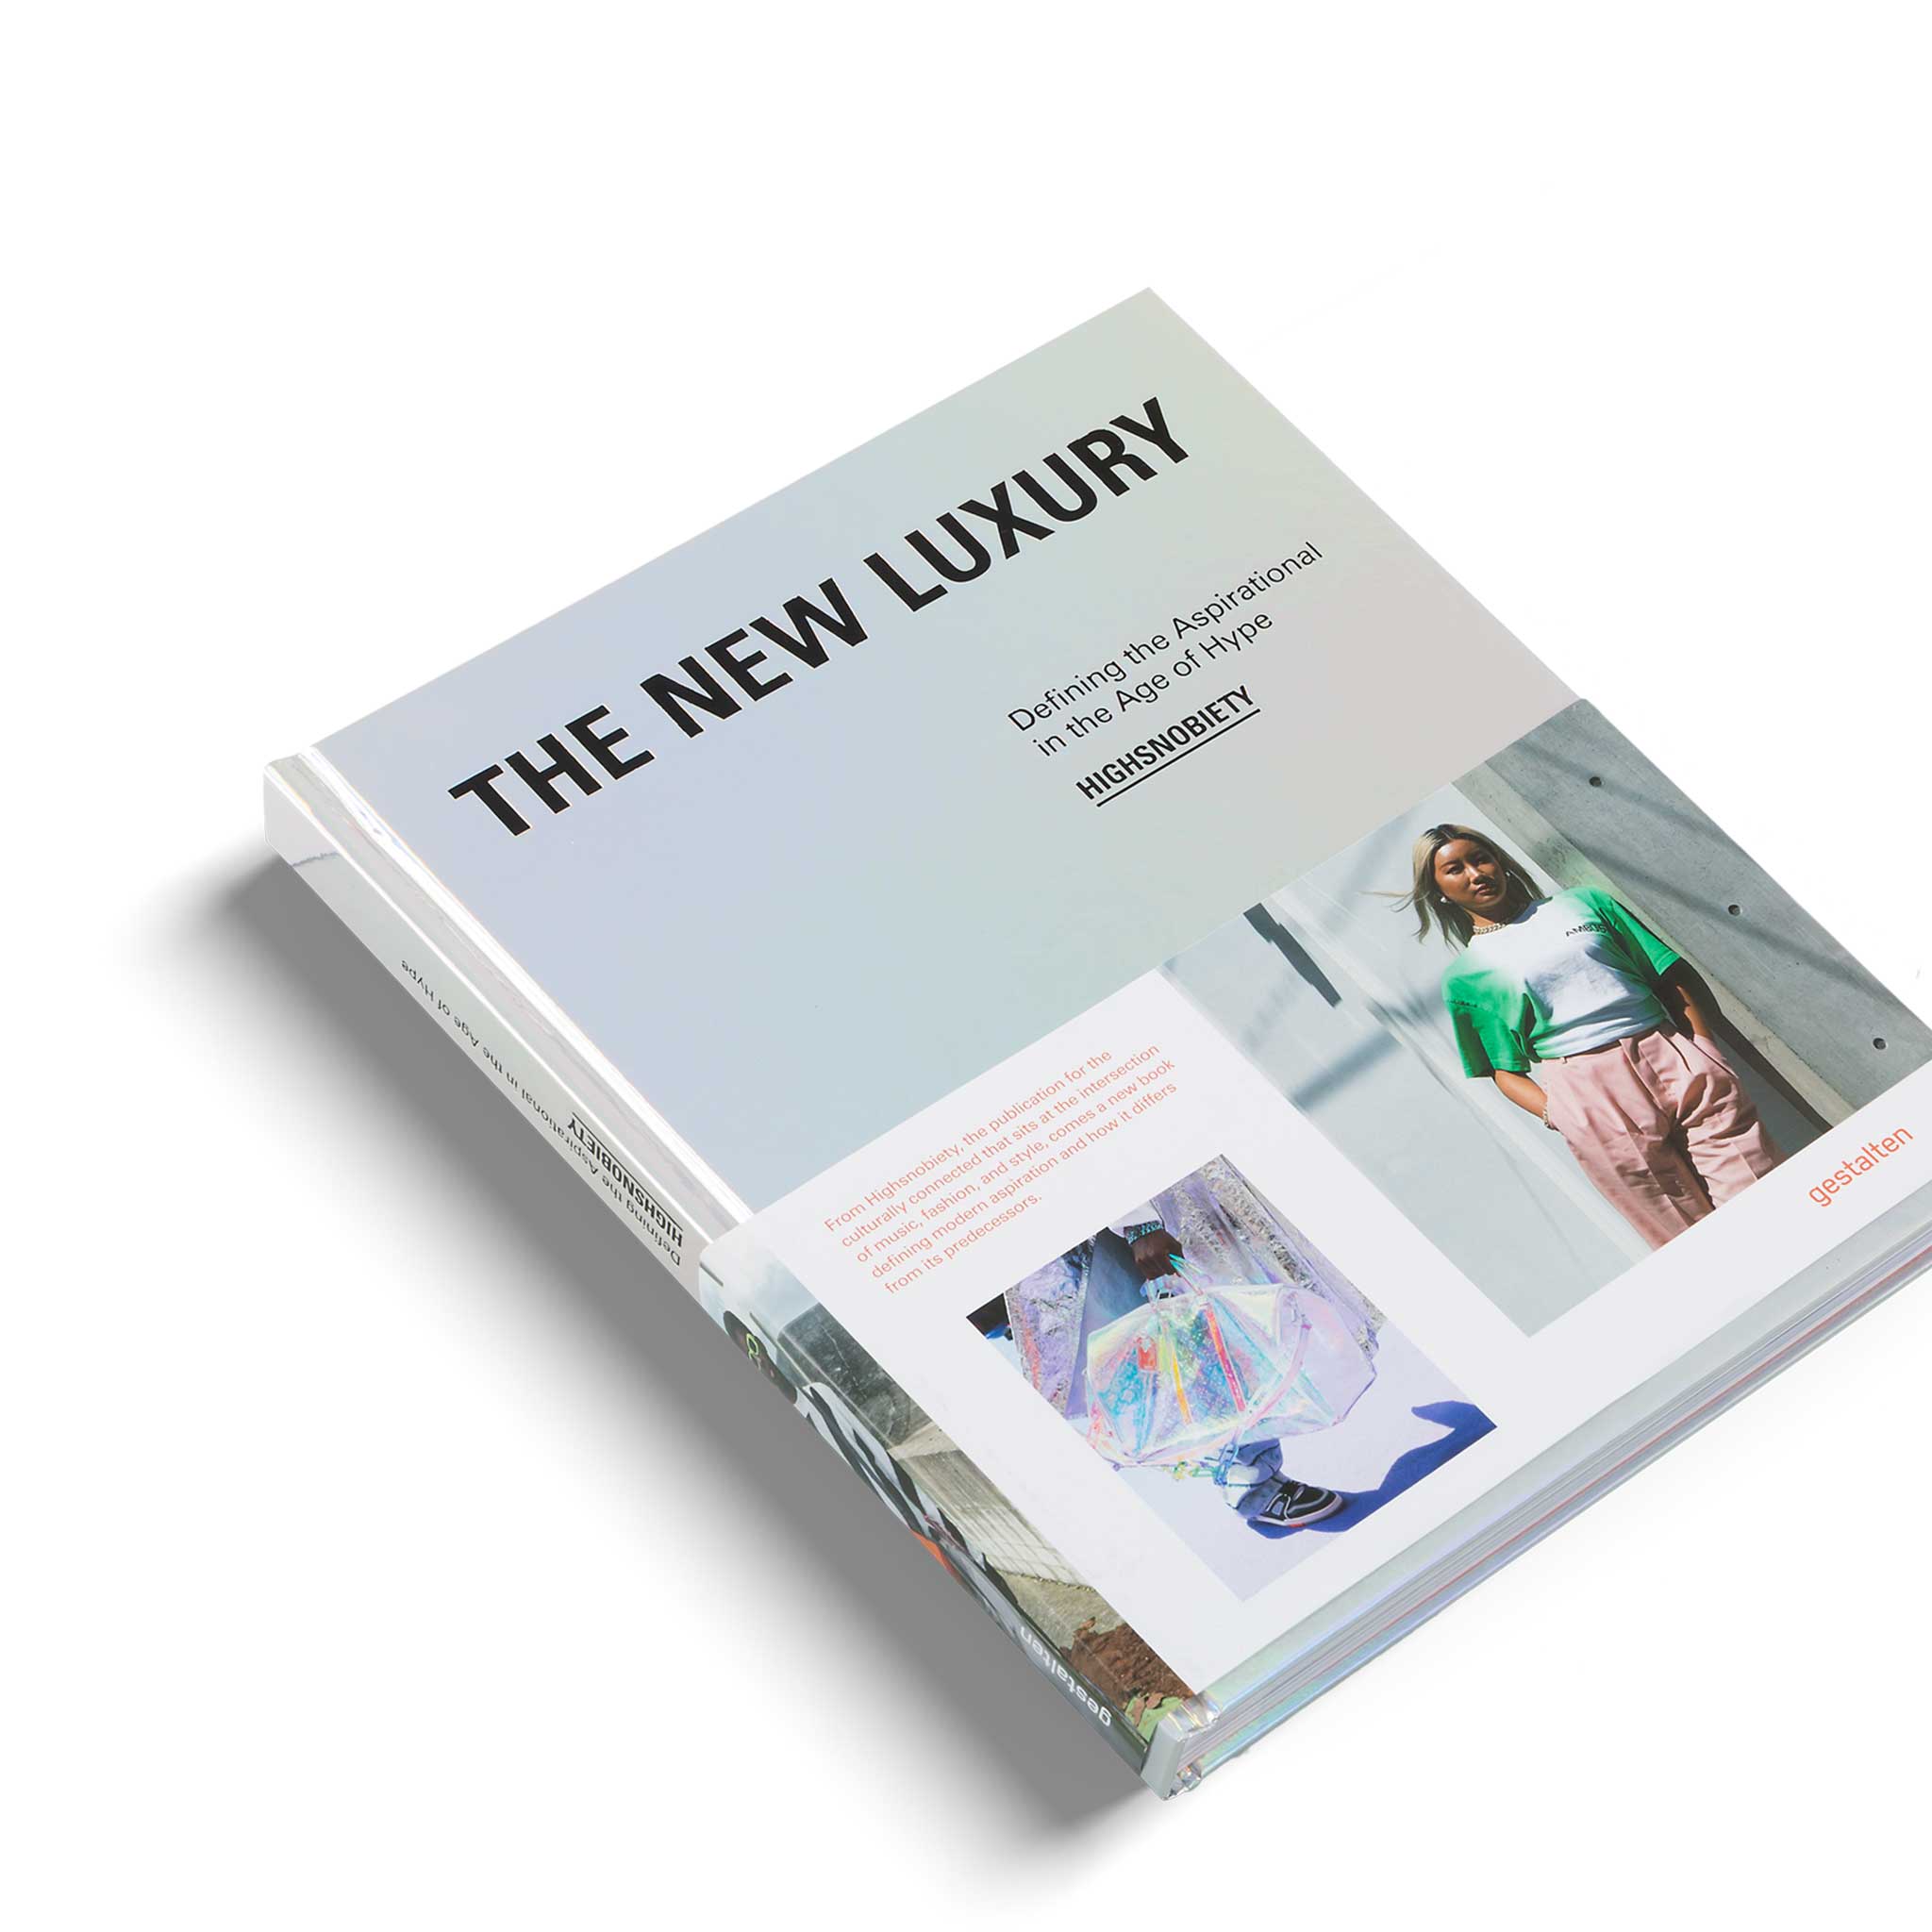 THE NEW LUXURY | HIGHSNOBIETY: DEFINING THE ASPIRATIONAL IN THE AGE OF HYPE | Gestalten Verlag - Charles & Marie